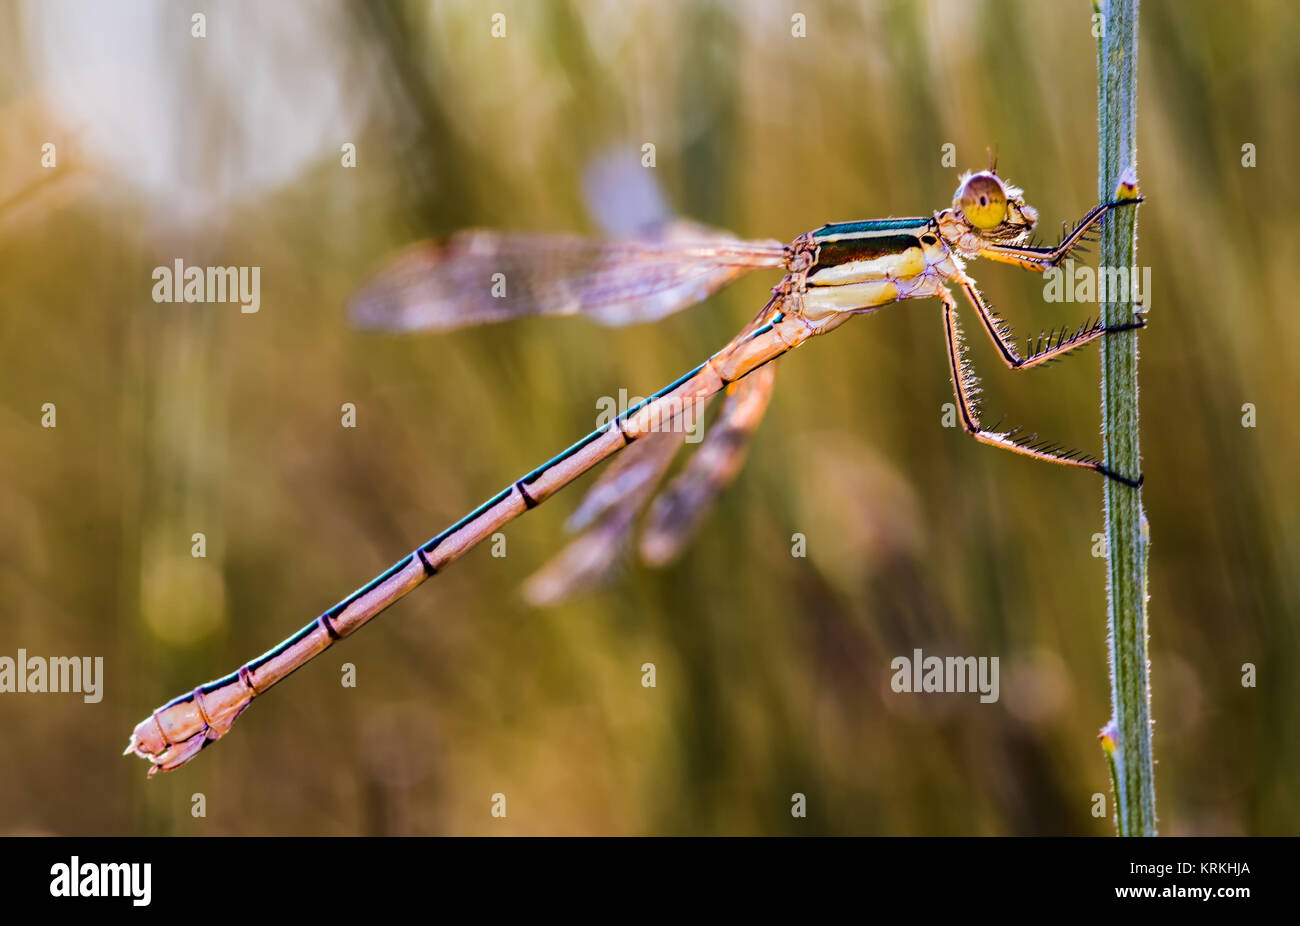 Damselfly photographed in their natural environment. Stock Photo